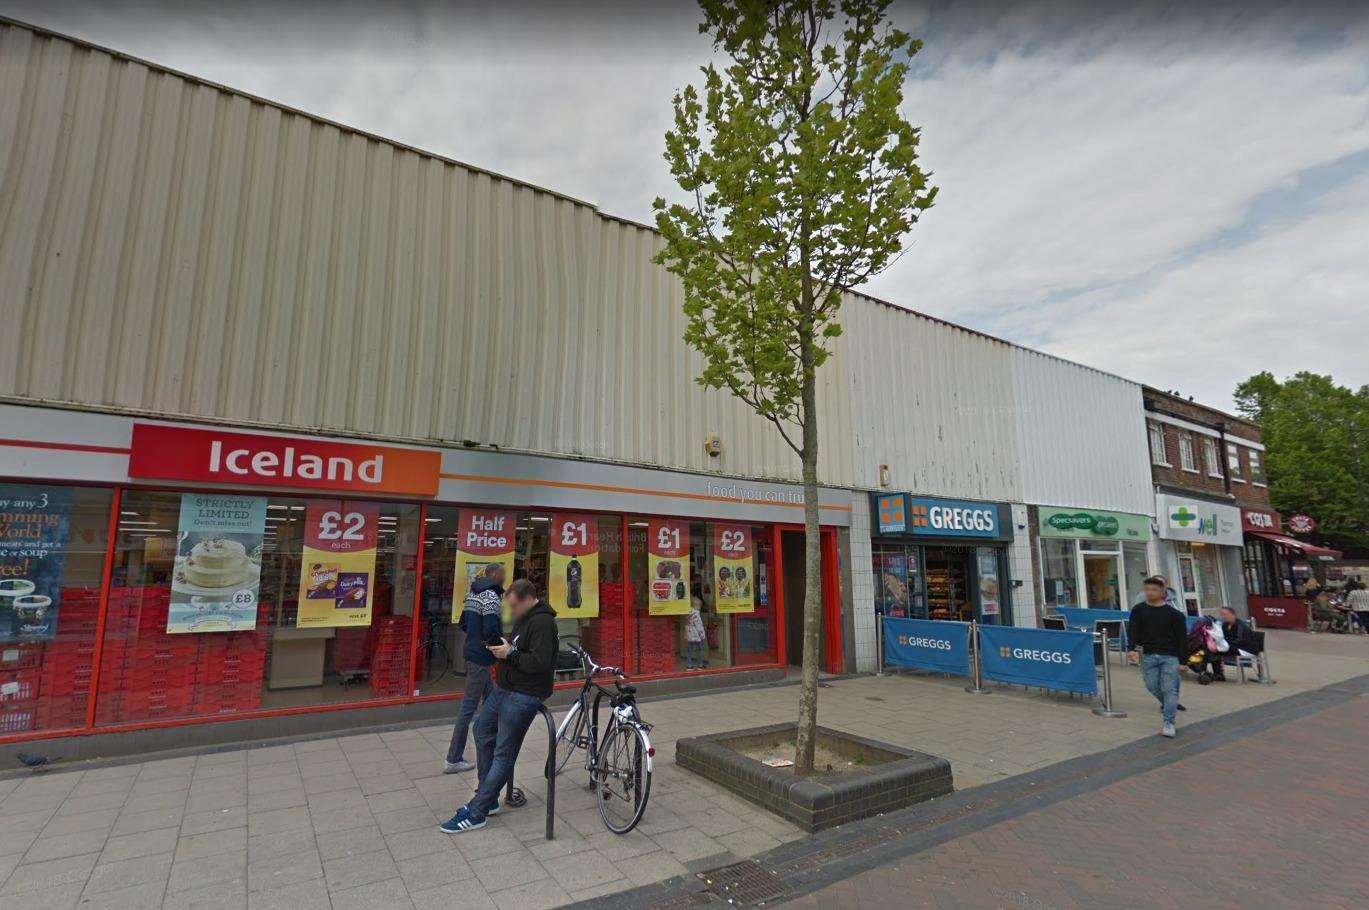 The two incidents happened outside Iceland in High Street, Gillingham (7476033)